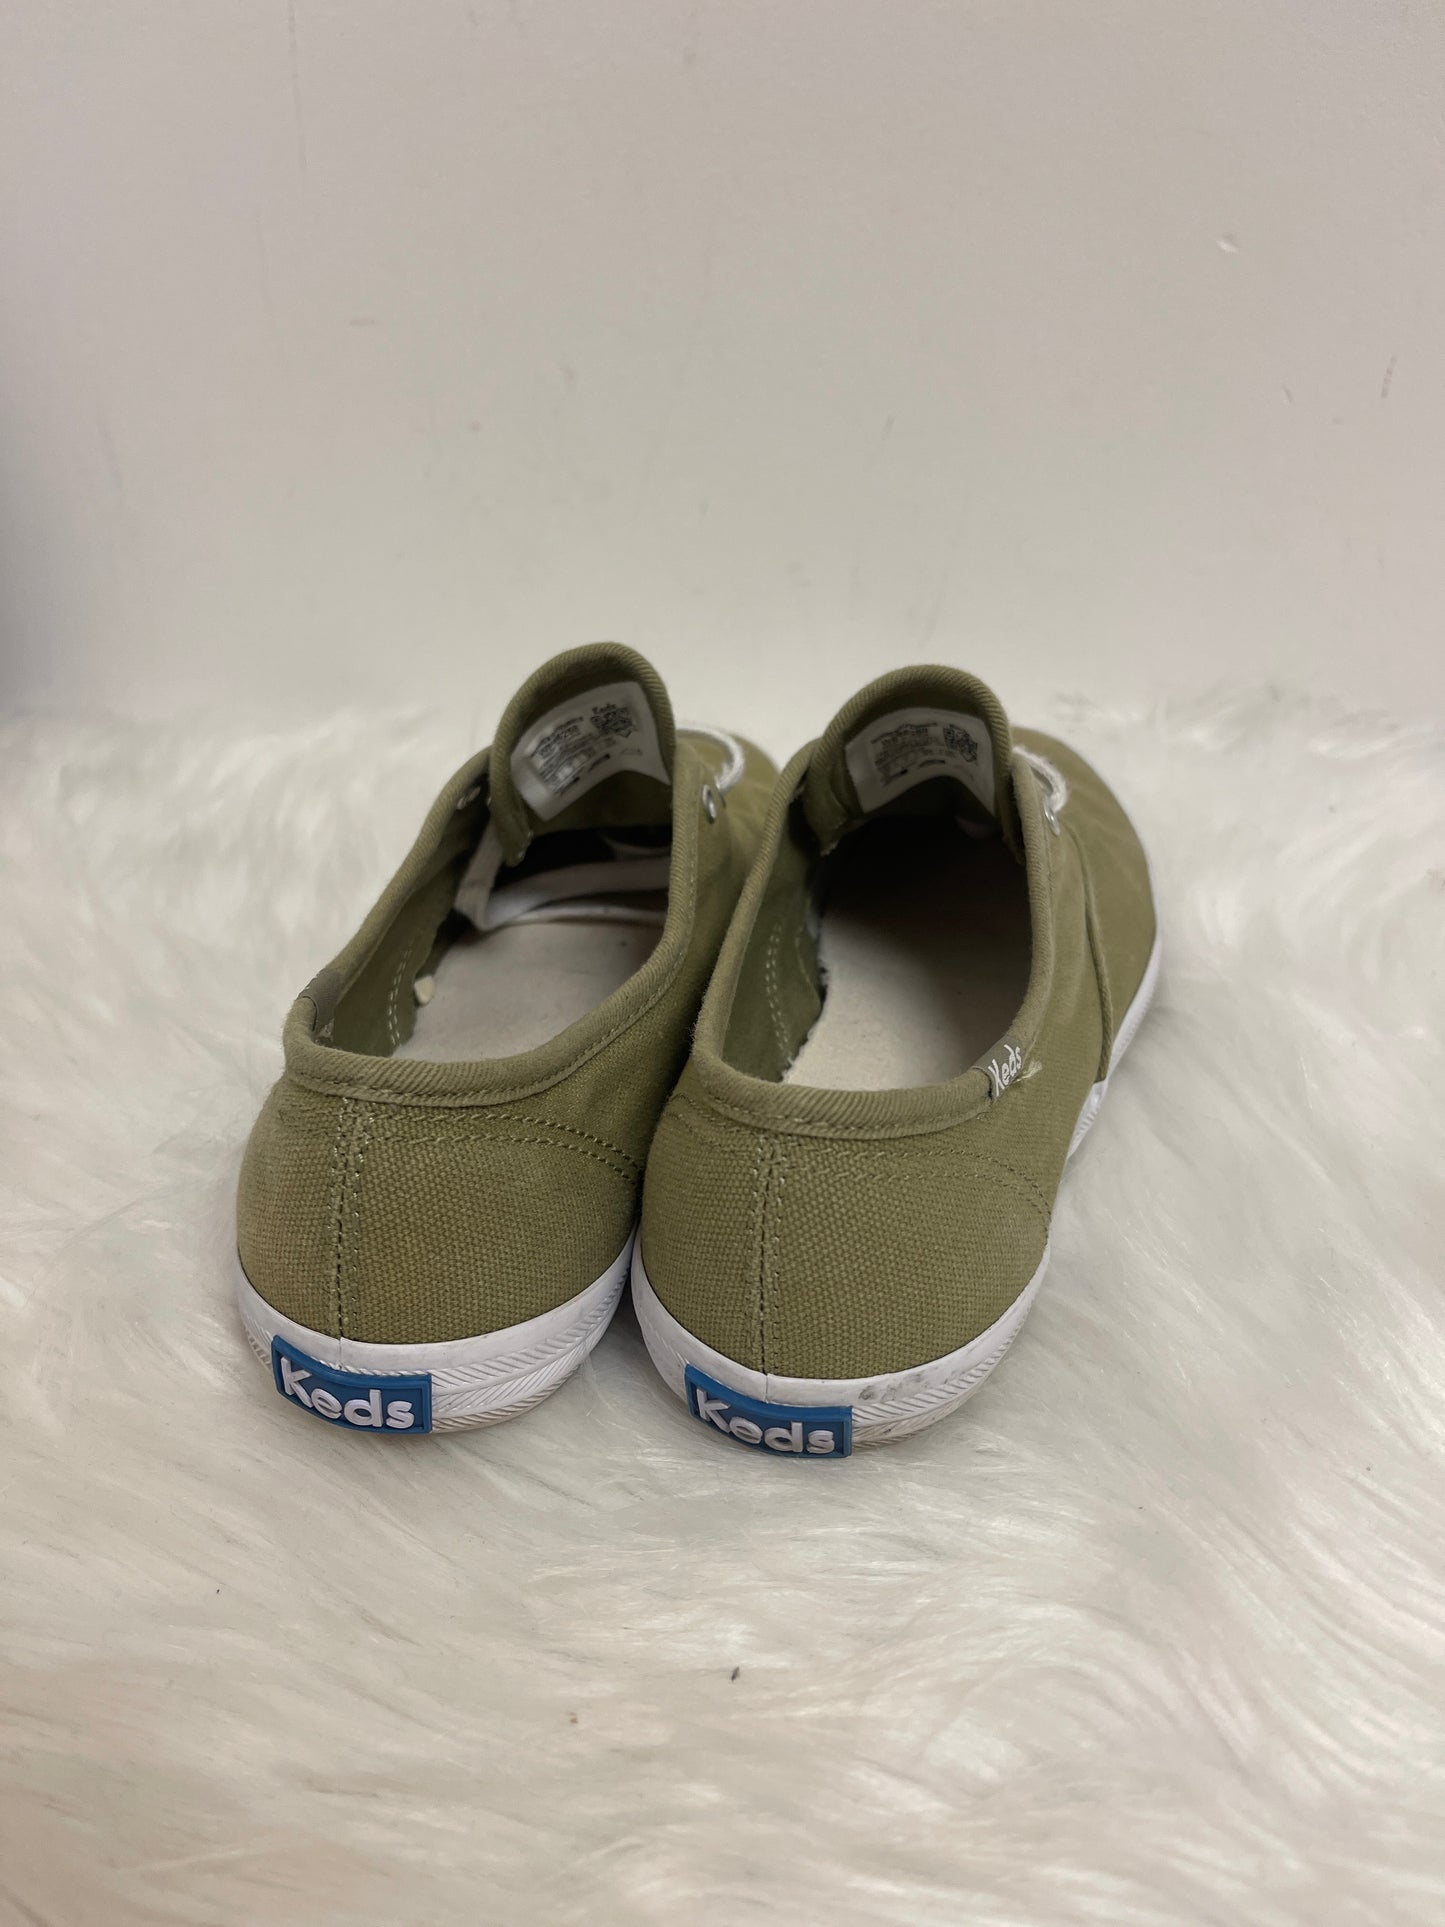 Shoes Sneakers By Keds  Size: 5.5